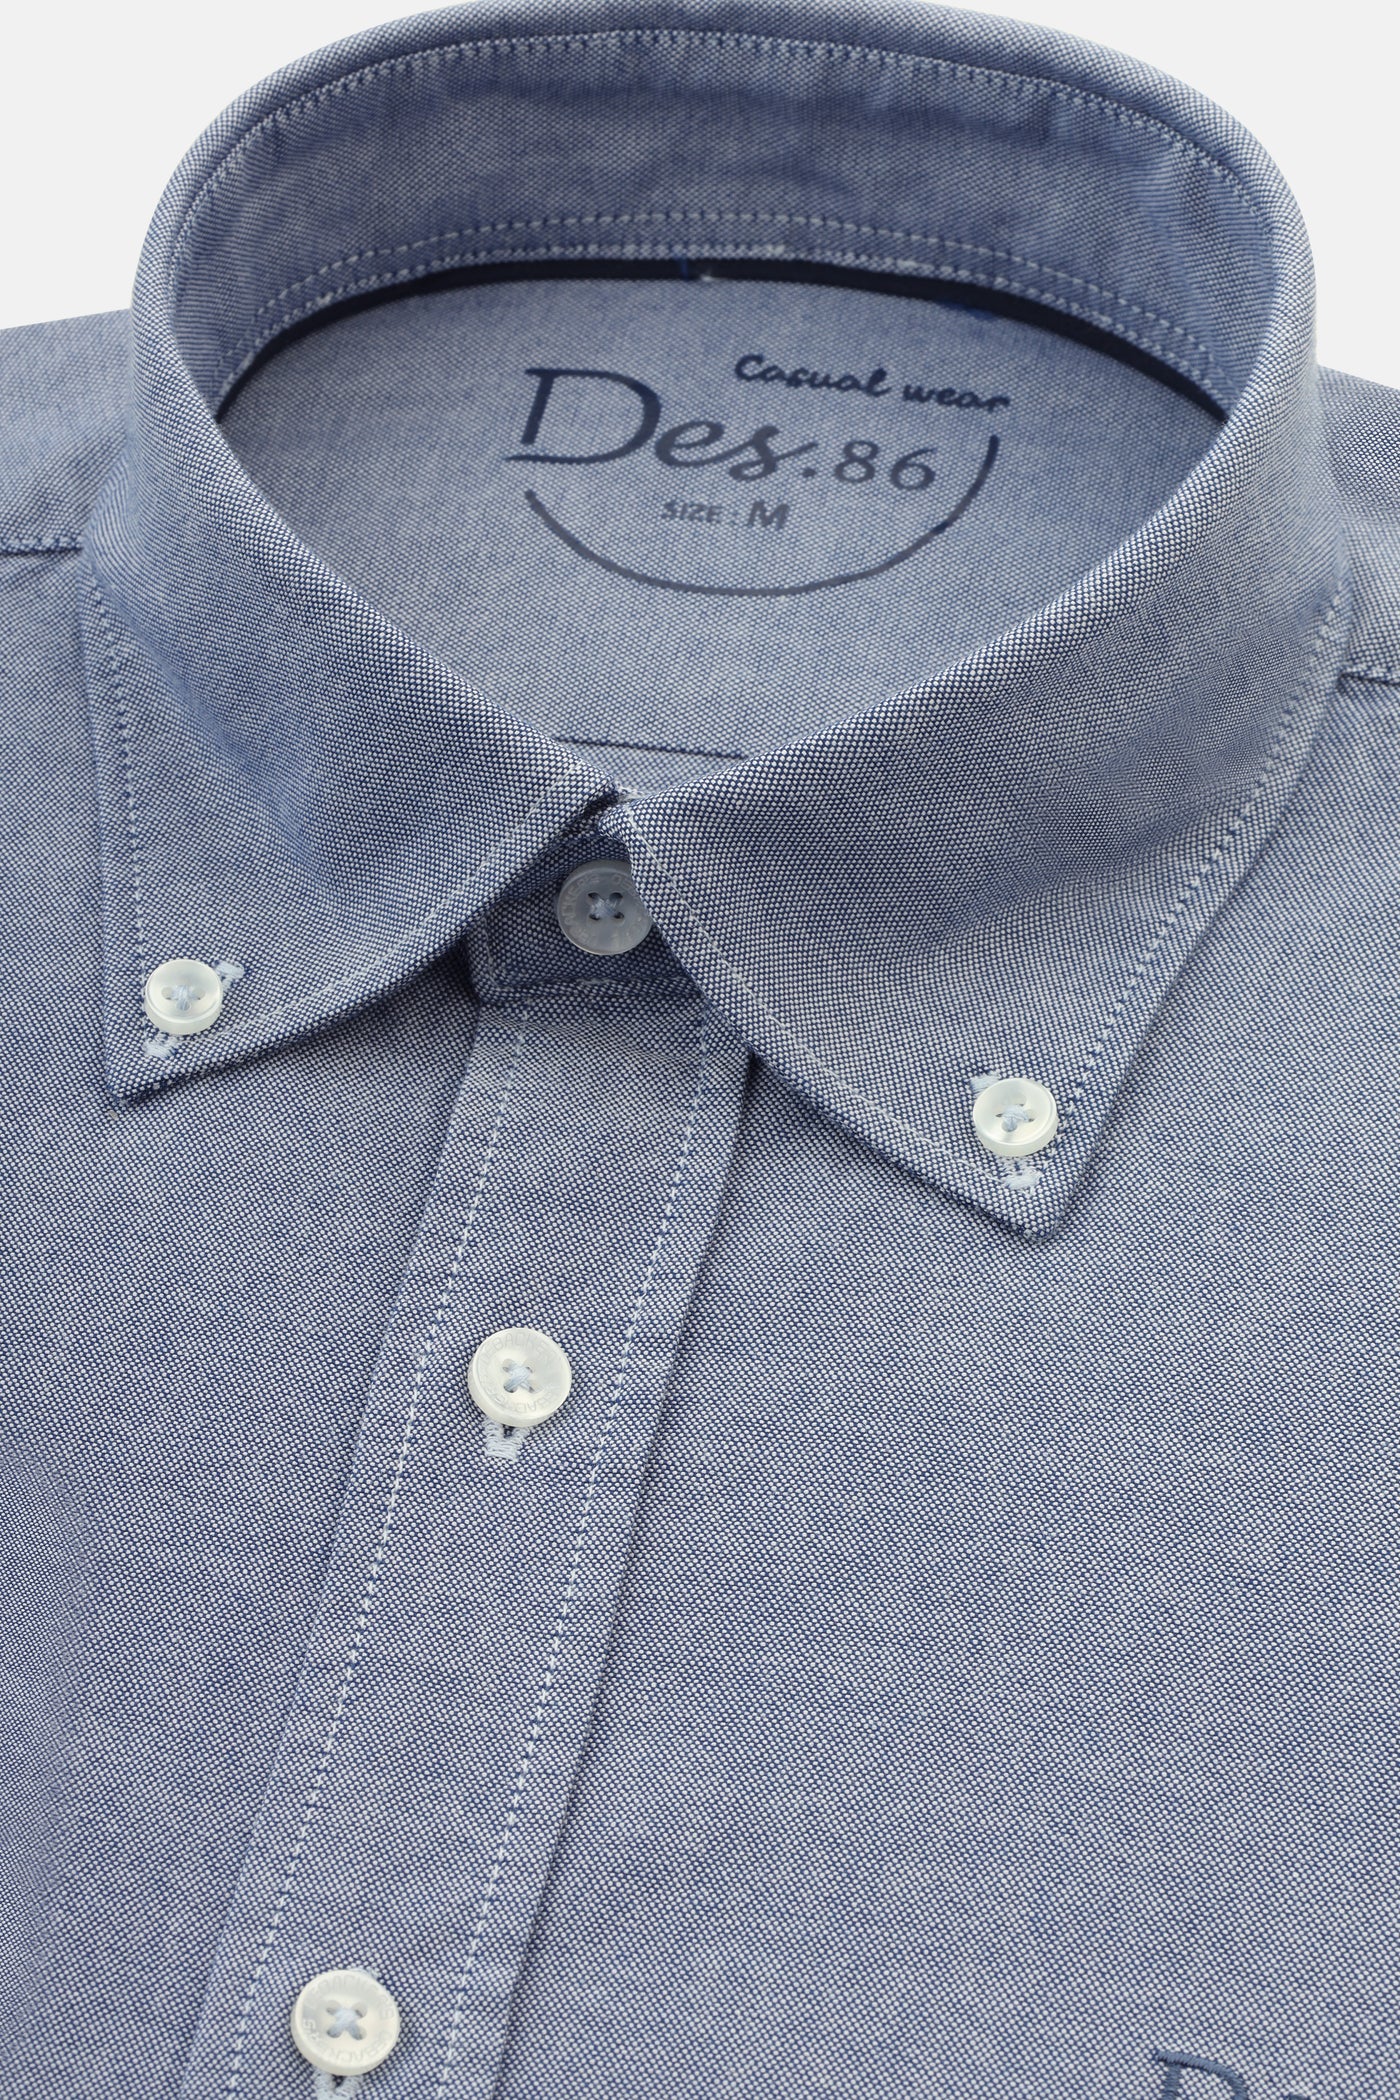 Solid Oxford Slate Gray Cotton Casual Shirt